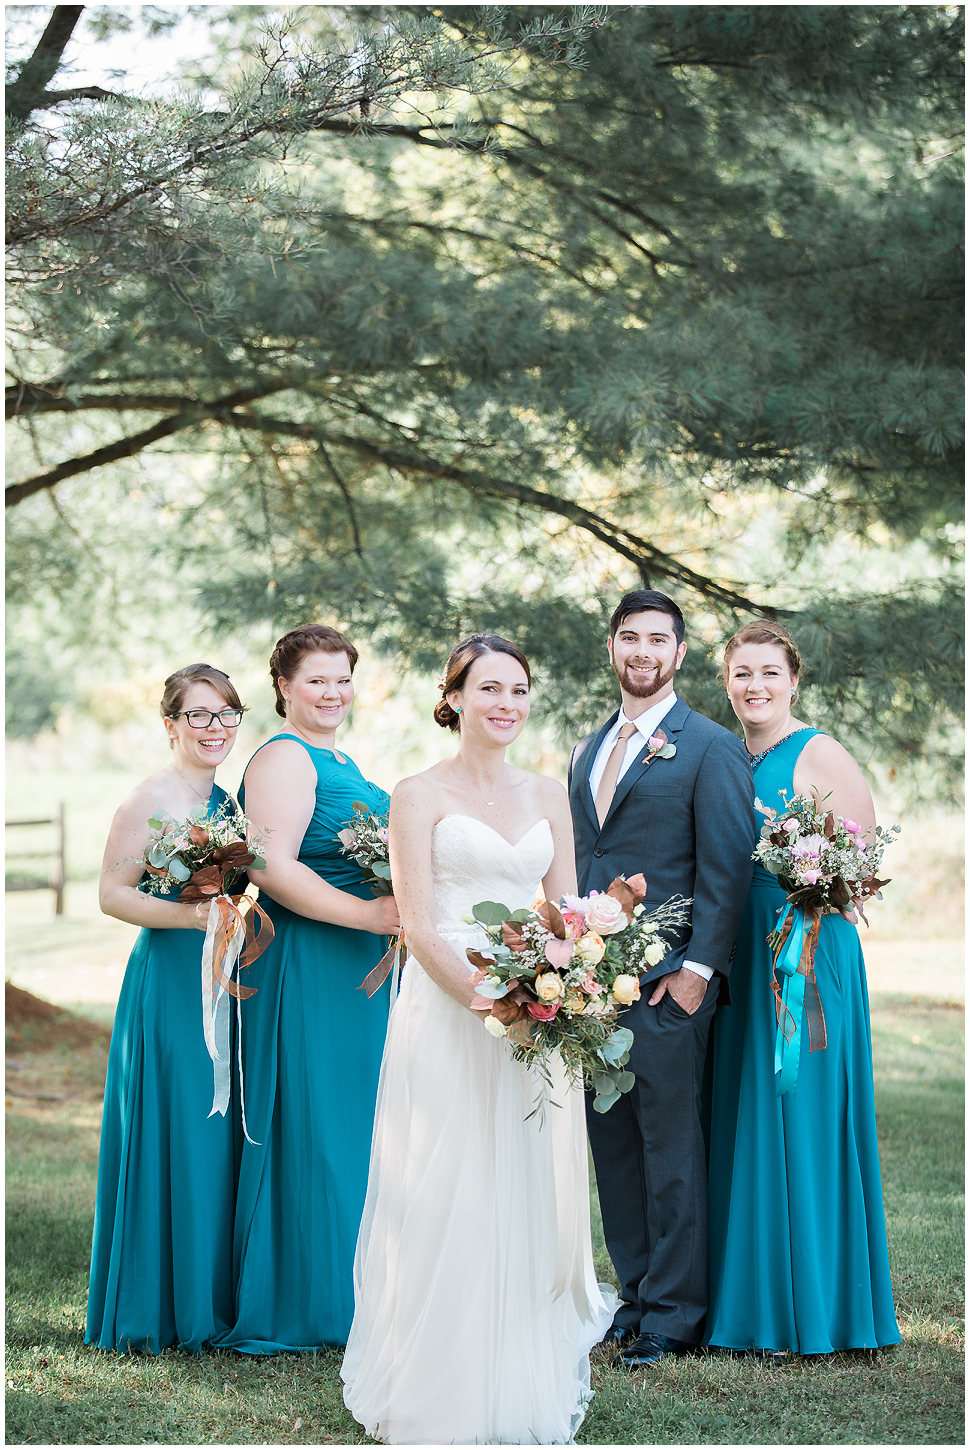 Formal Wedding portrait of bride and bridesmaids wearing teal dresses. Brother of bride in Grey suit. 